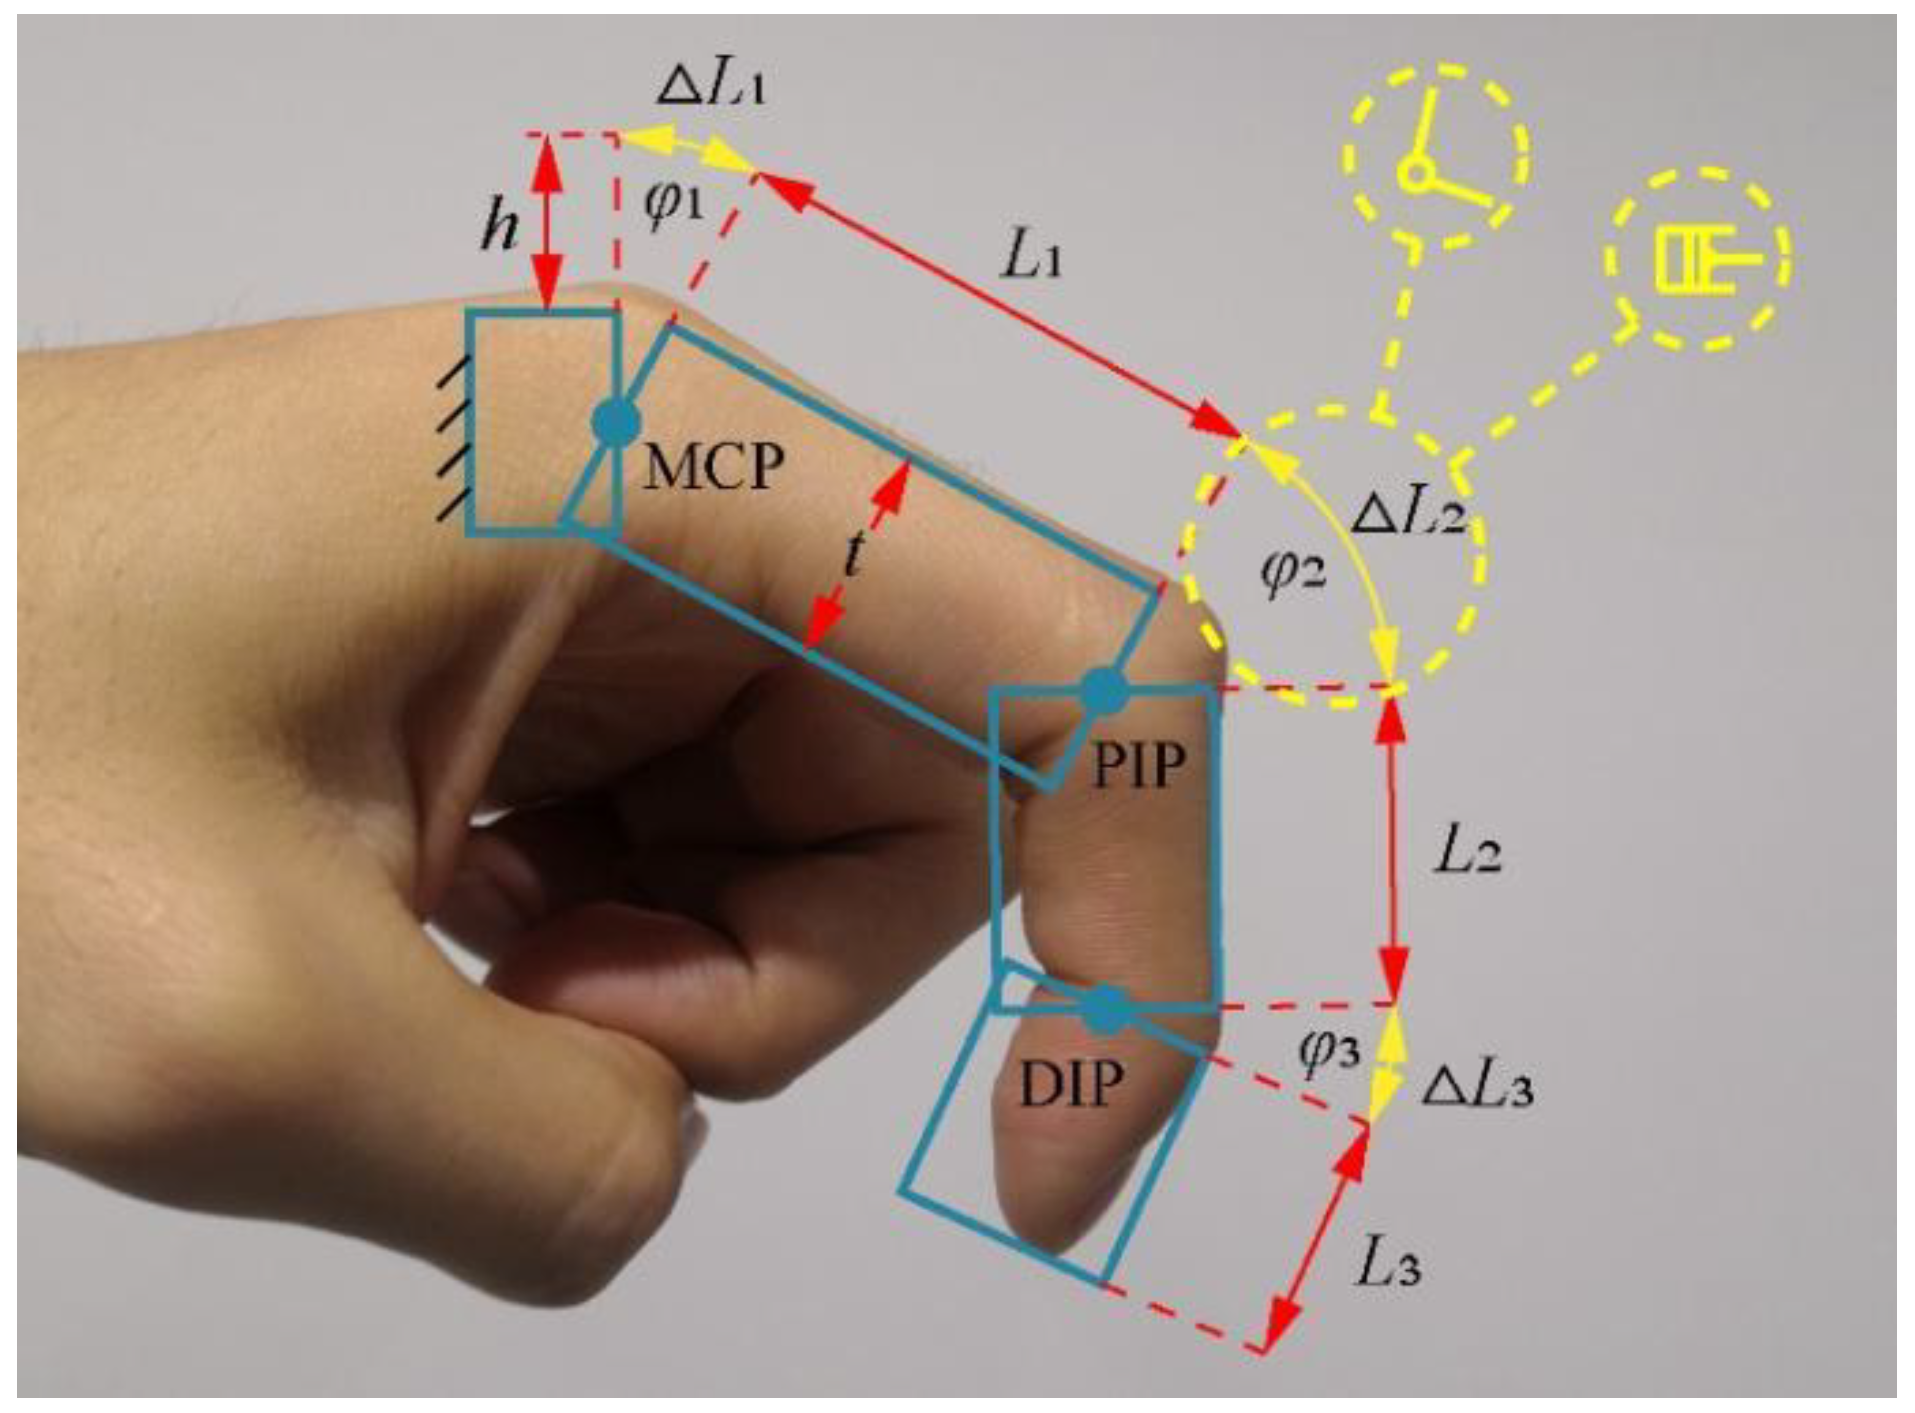 Kinematic model of a hand: each finger has 3 joints with 4 DoF : index